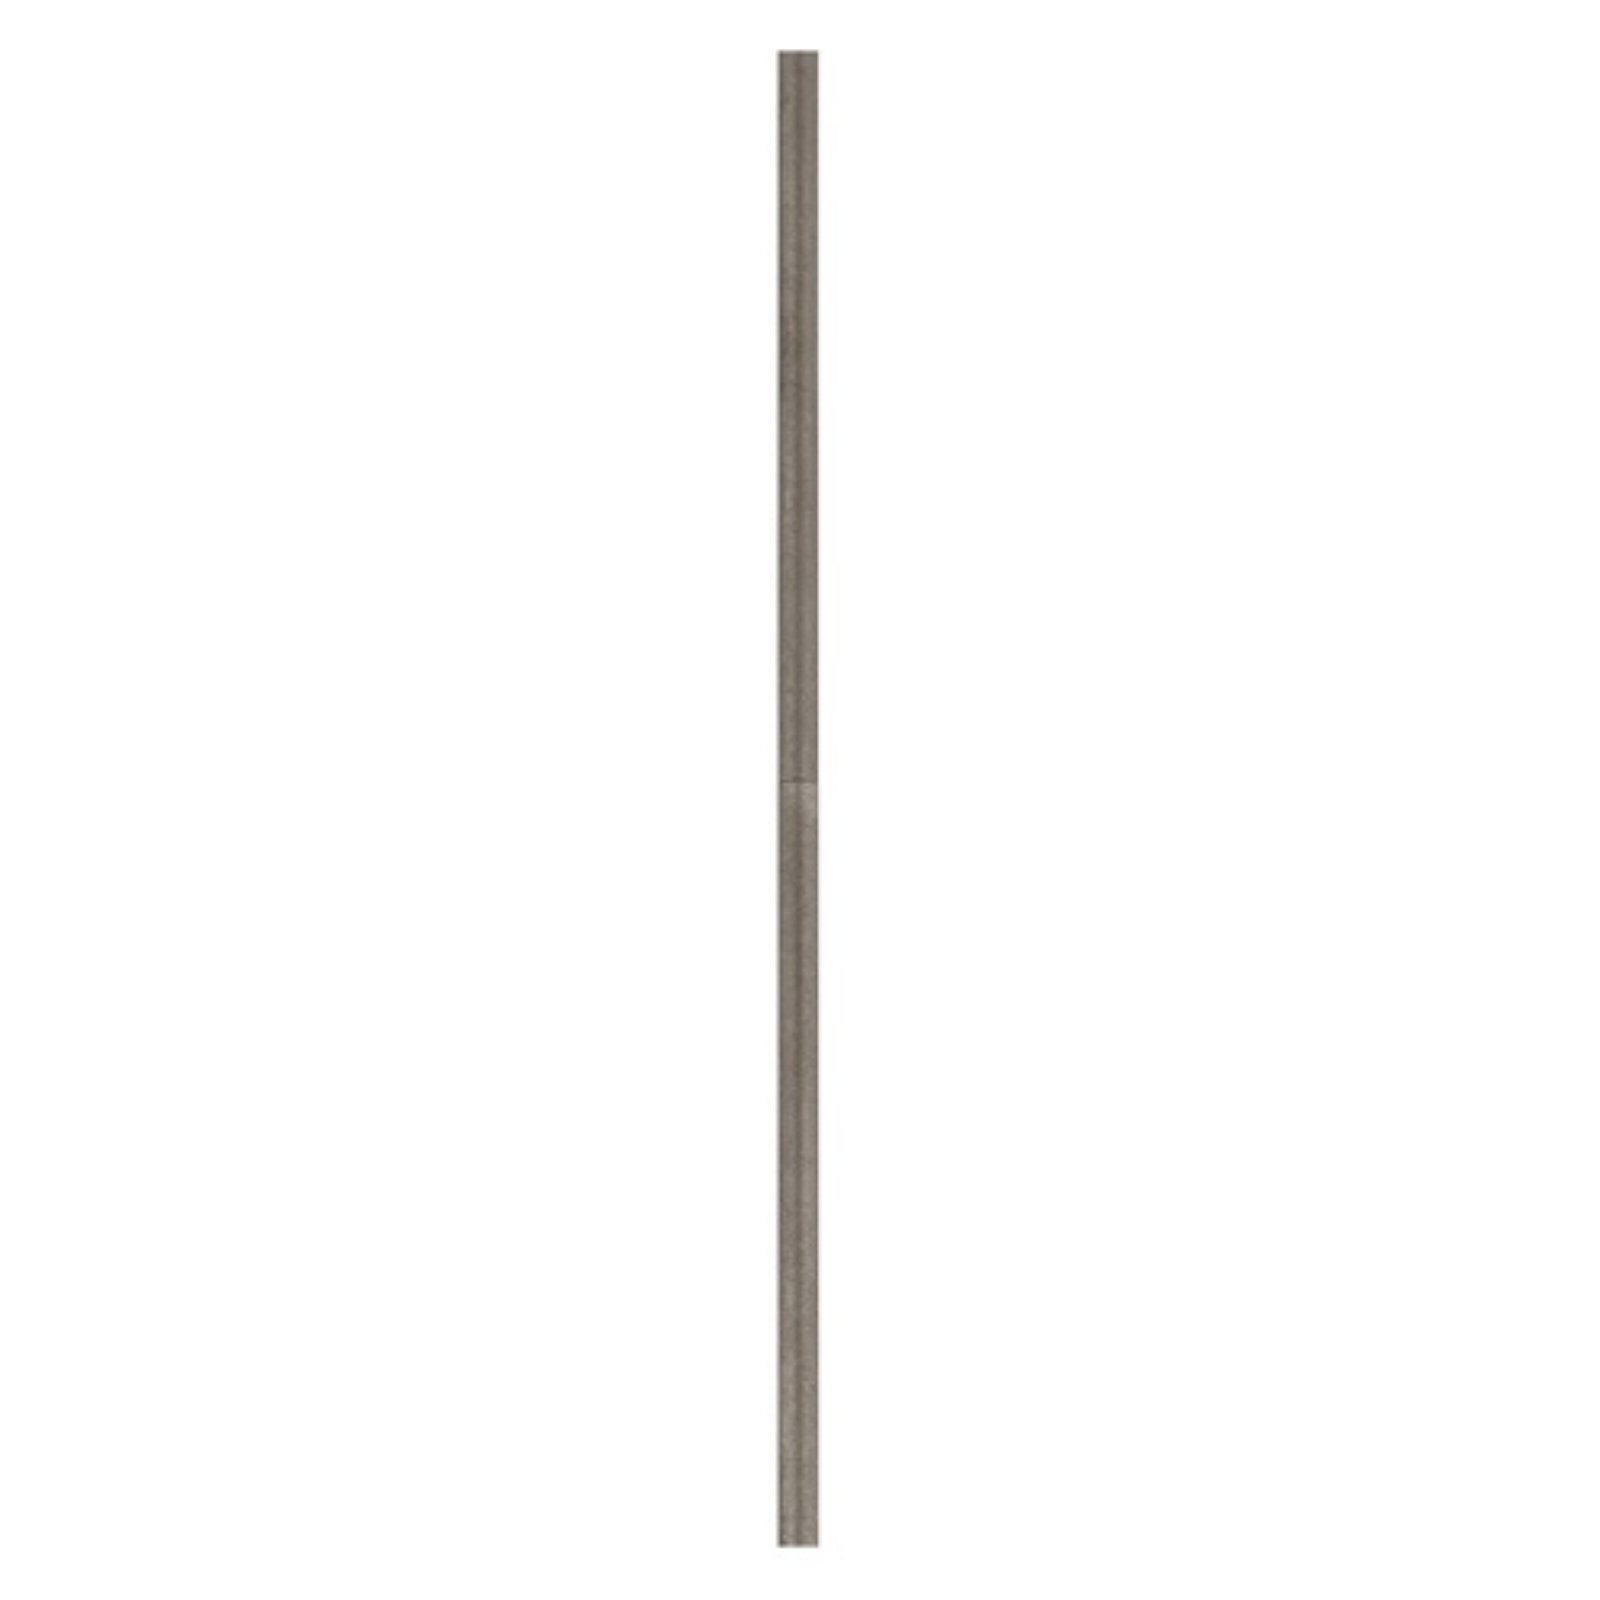 Savoy House DR-48-242 48" Down Rod in Aged Steel